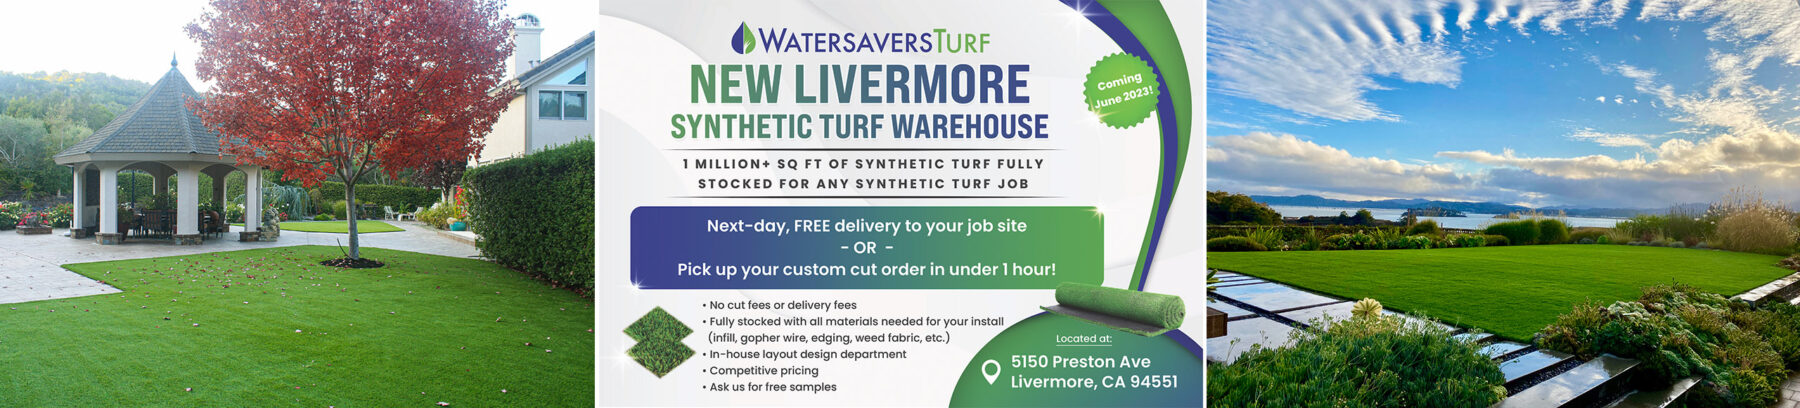 New Synthetic Turf Warehouse in Livermore Announcement